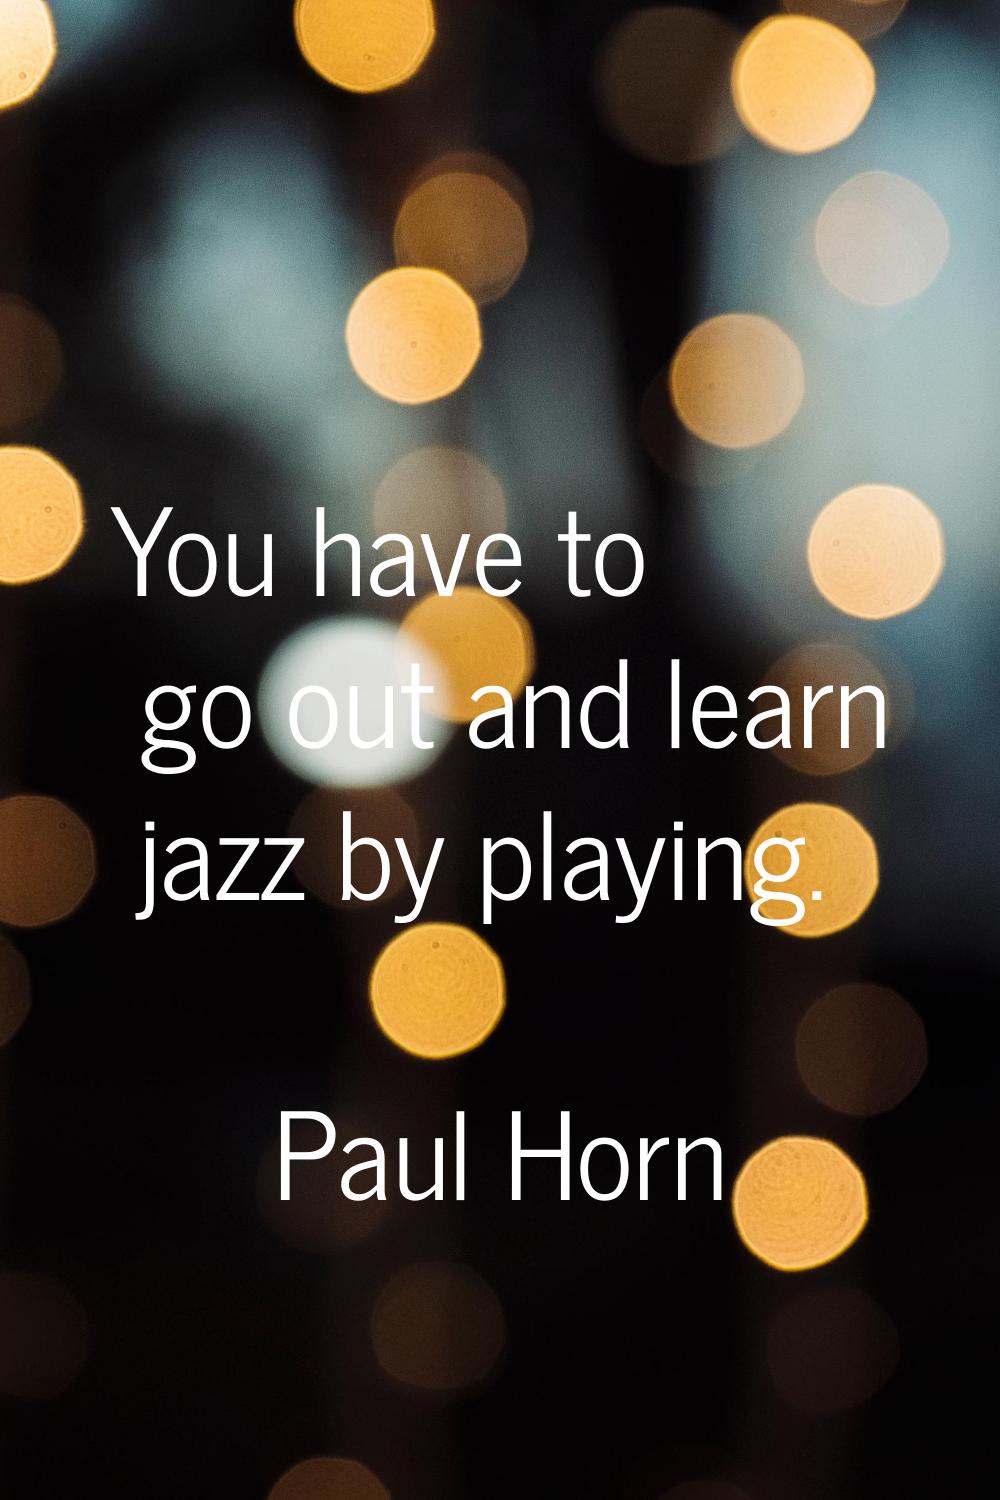 You have to go out and learn jazz by playing.